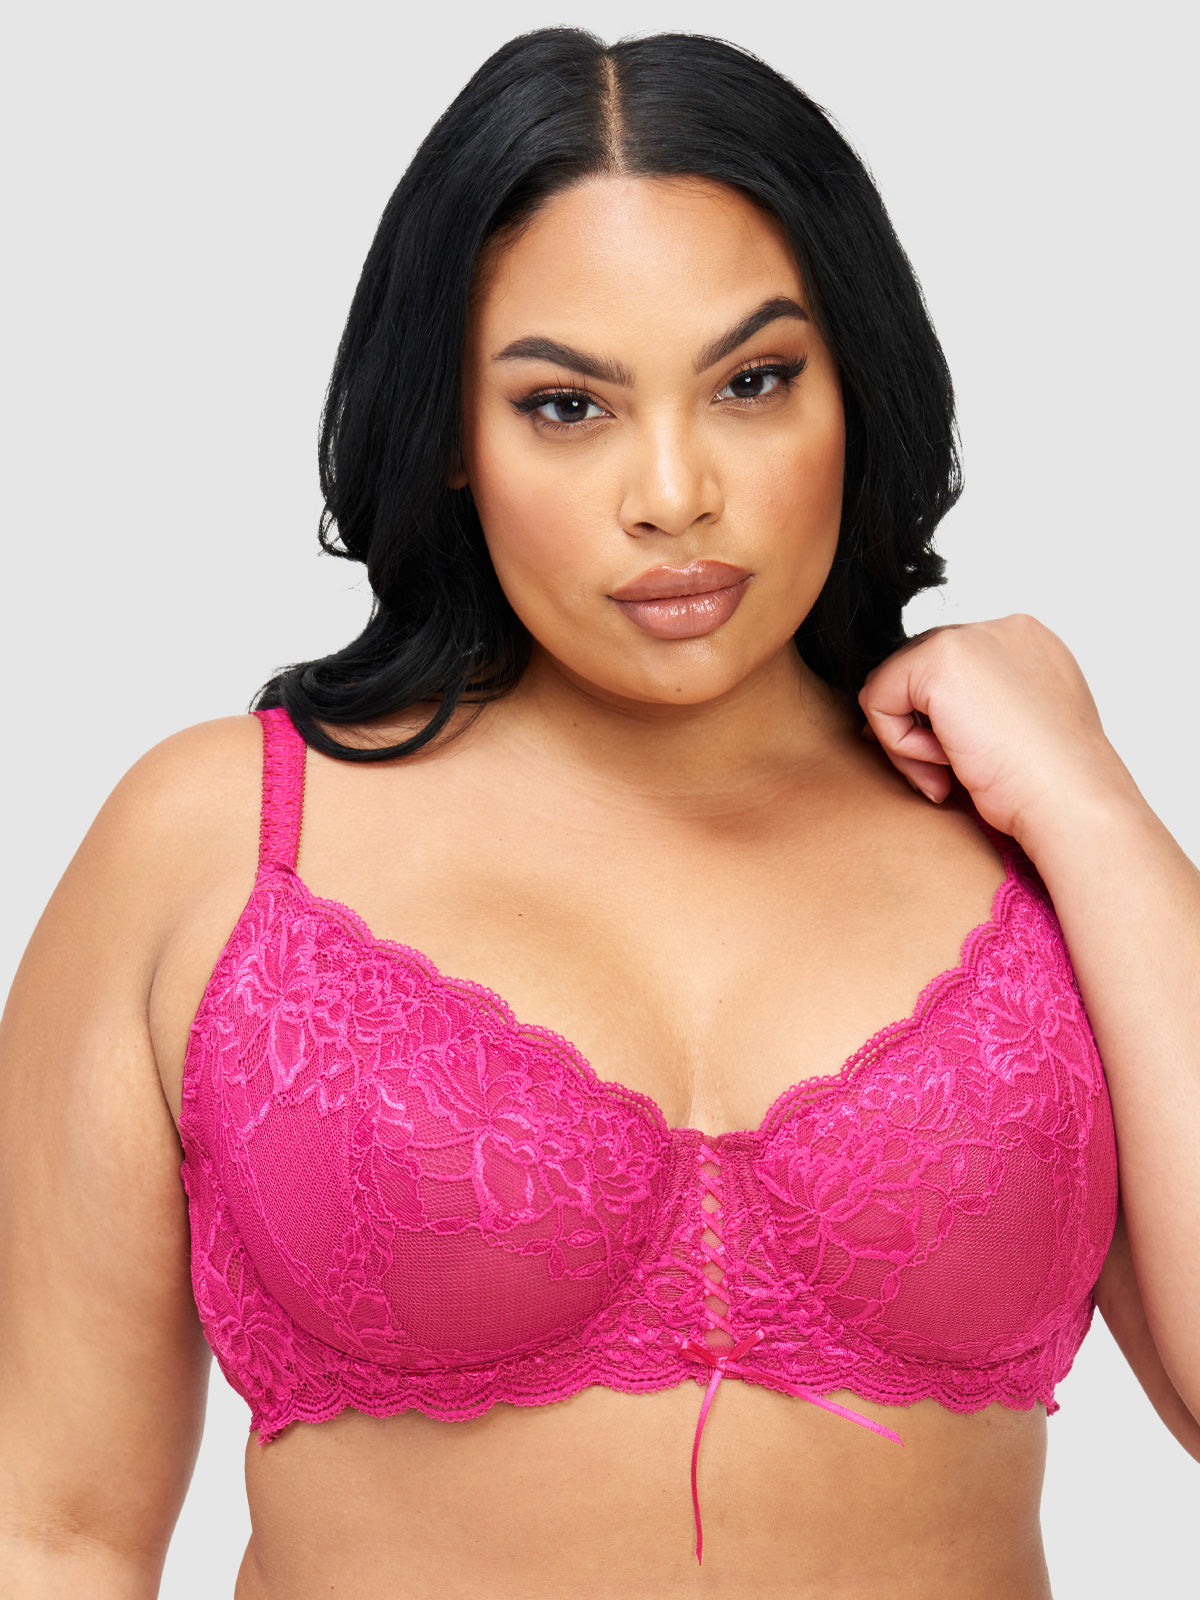 This best-selling bra that's super supportive and available up to